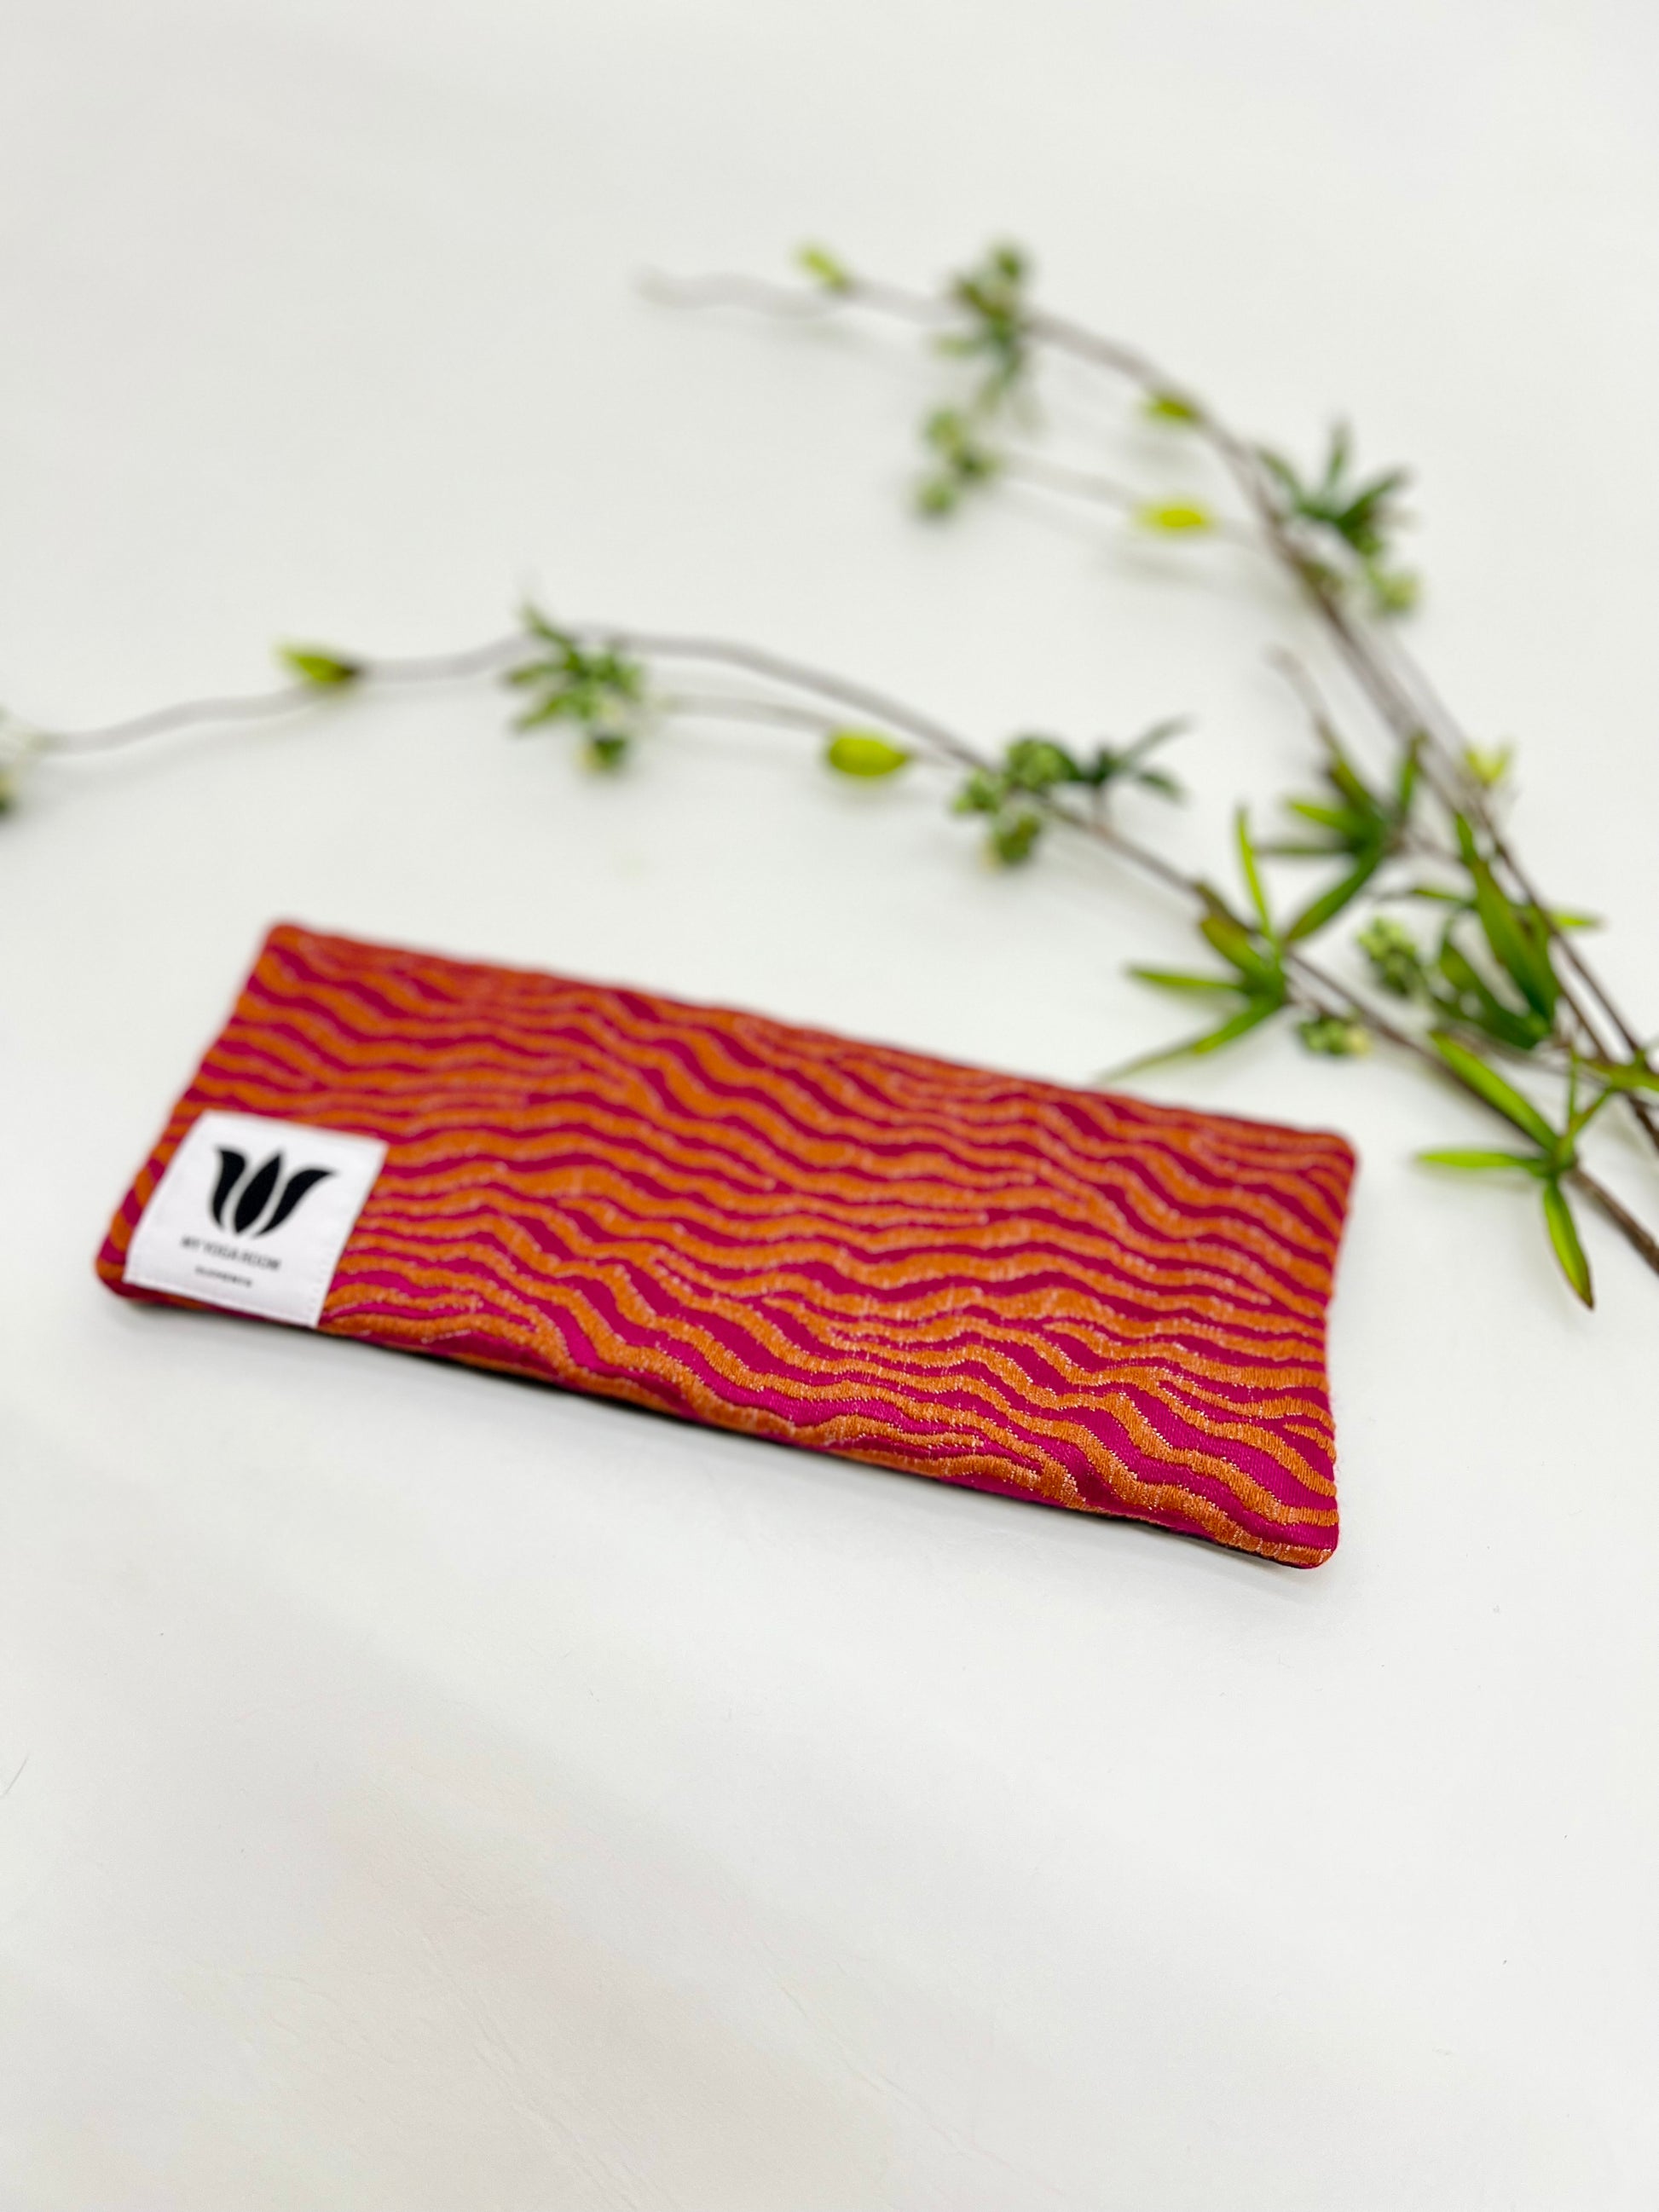 Yoga eye pillow, unscented, therapeutically weighted to soothe eye strain and stress or enhance your savasana. Handcrafted in Canada by My Yoga Room Elements. Orange/pink modern print and bamboo fabric.